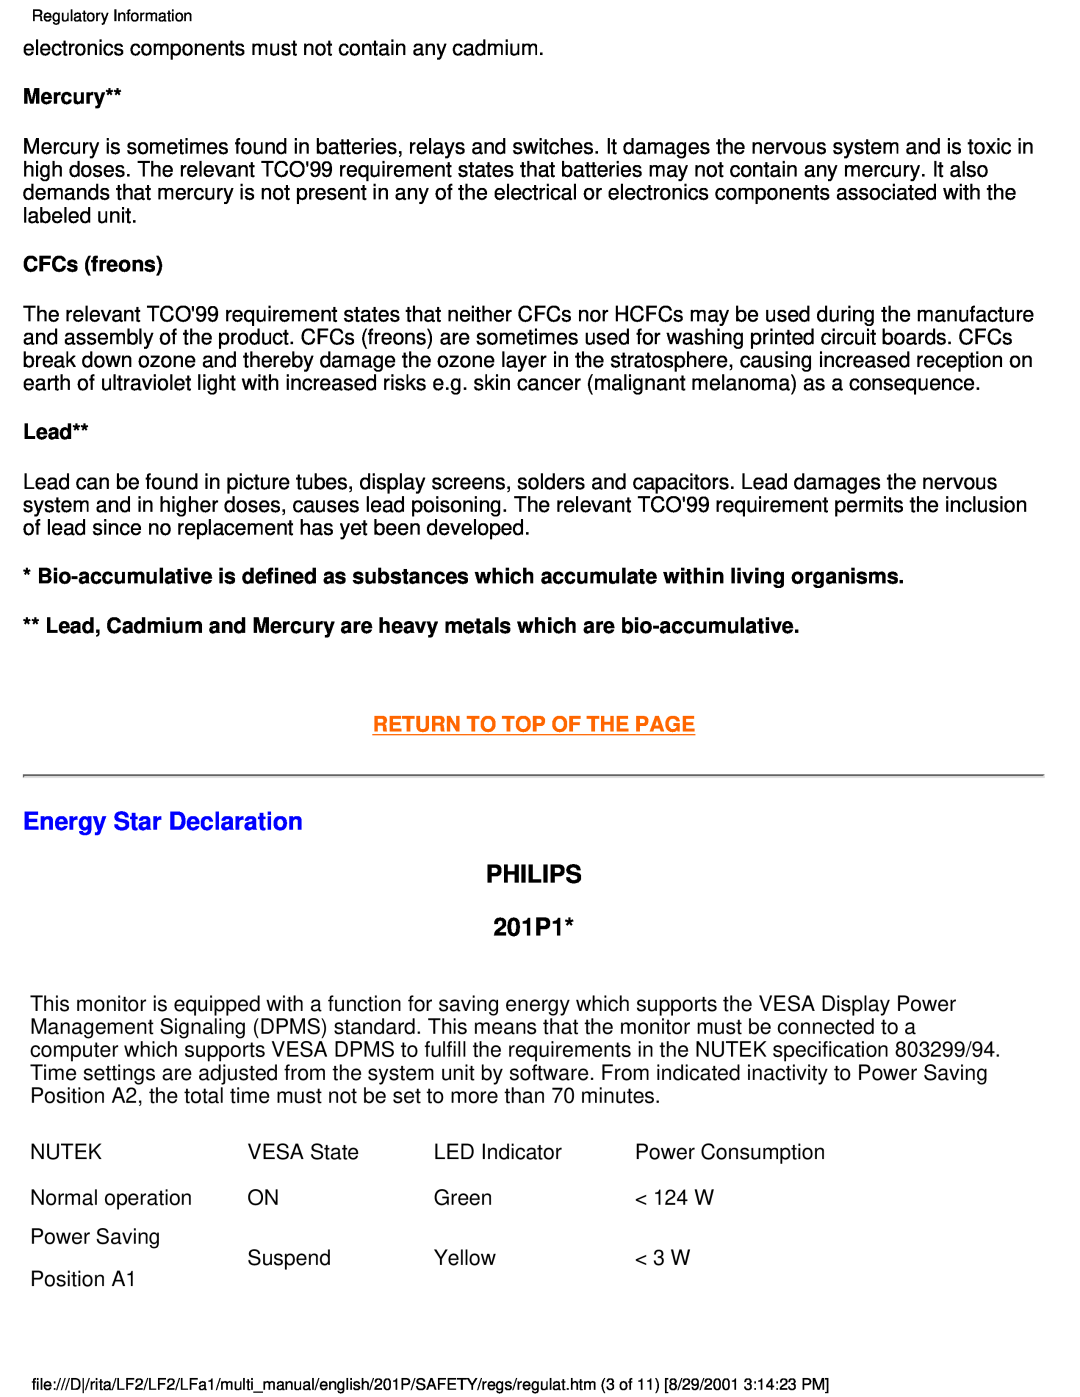 Philips user manual Energy Star Declaration, PHILIPS 201P1, Mercury, CFCs freons, Lead, Return To Top Of The Page 